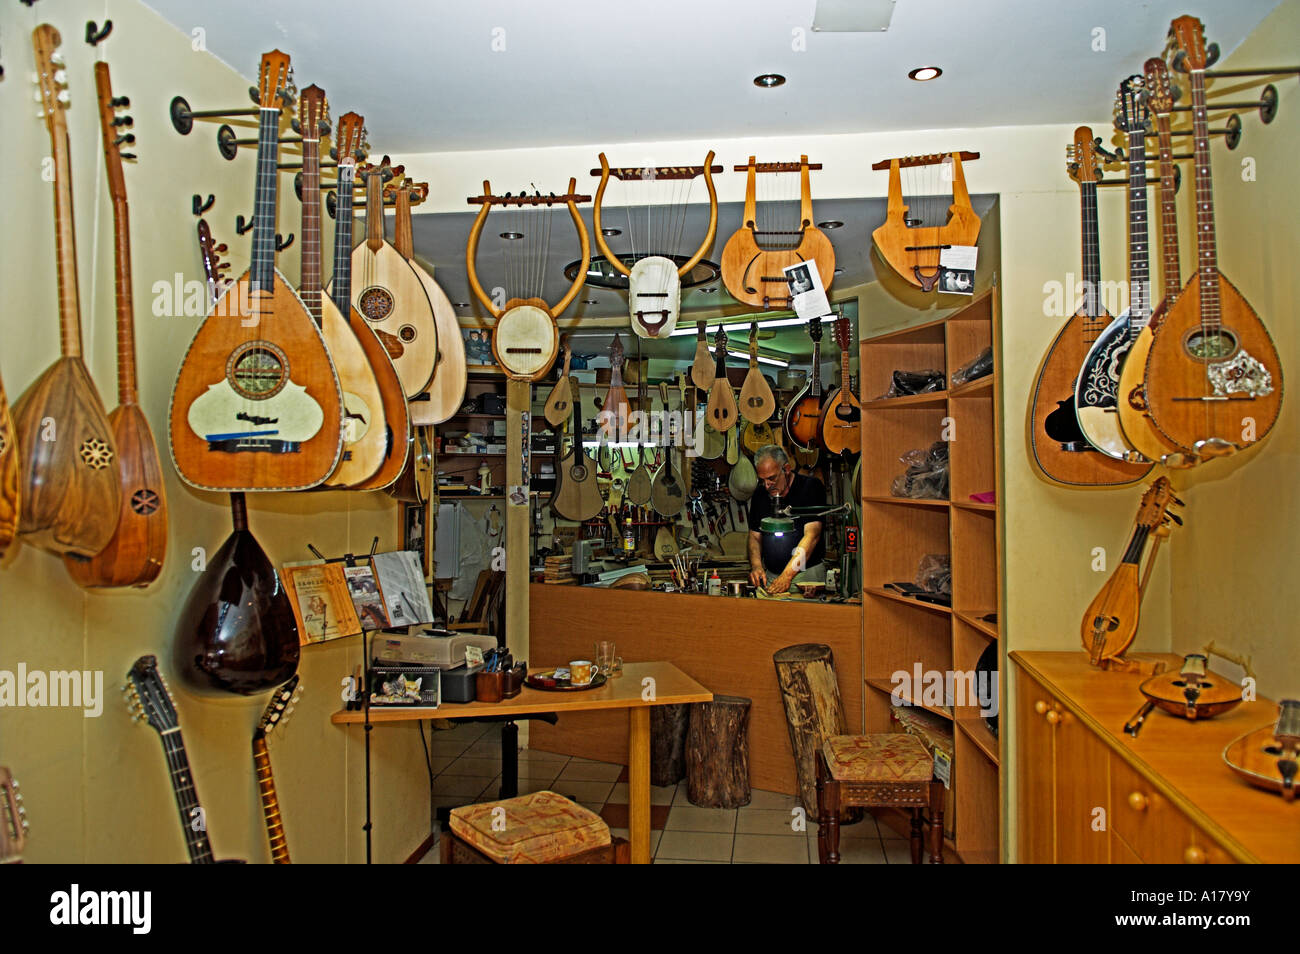 Stringed instruments displayed in shop and a craftsman instrument maker  Stock Photo - Alamy